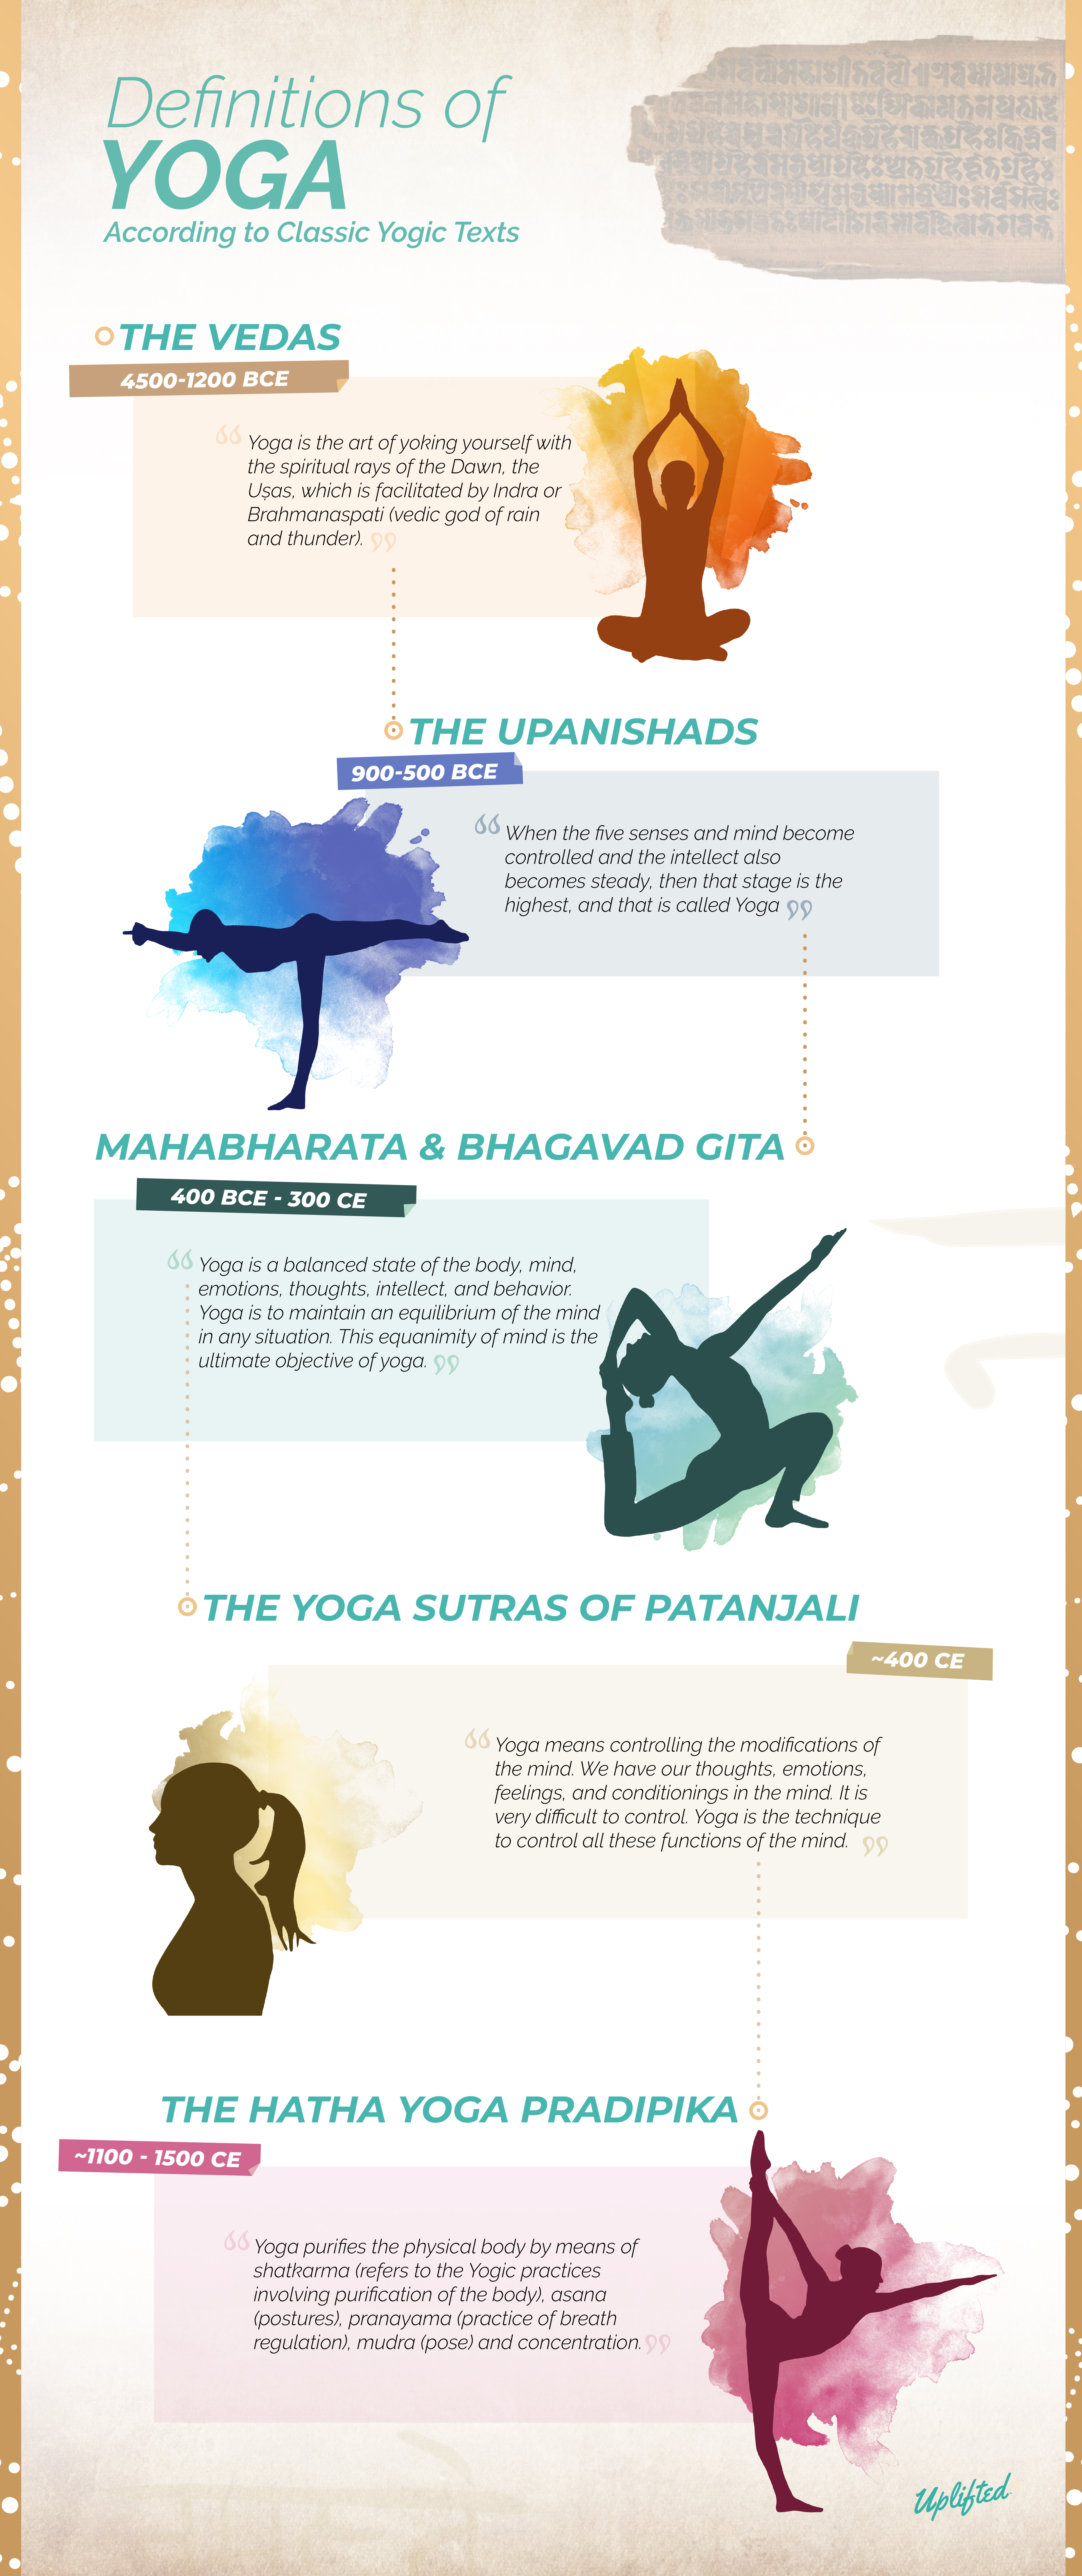 What is Hatha Yoga - Tradition & History